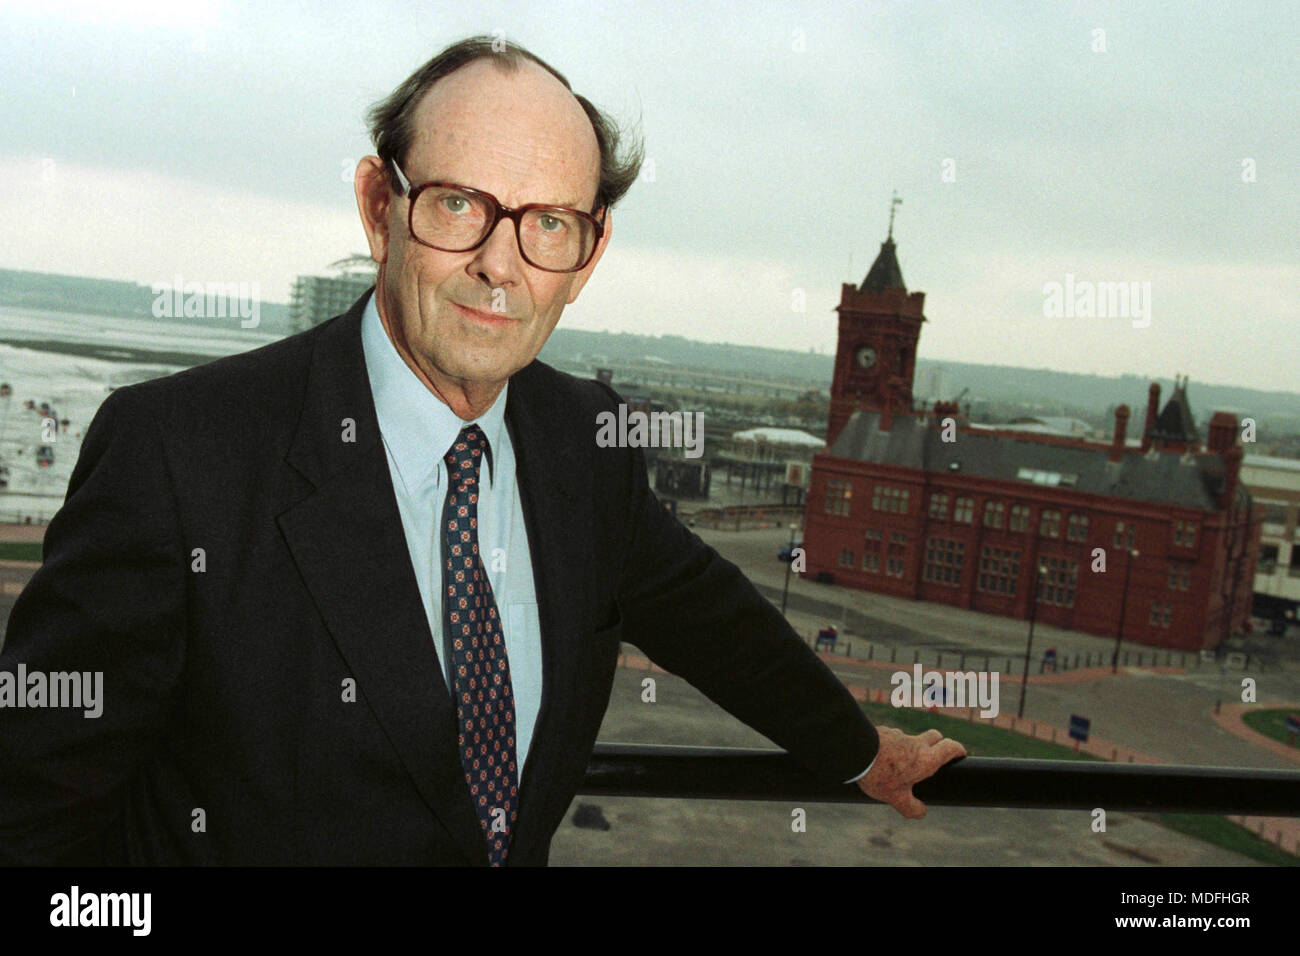 Nicholas Edwards, Lord Crickhowell born 25 February 1934 died 17 March 2018, Conservative Party politician and former Secretary of State for Wales. Stock Photo